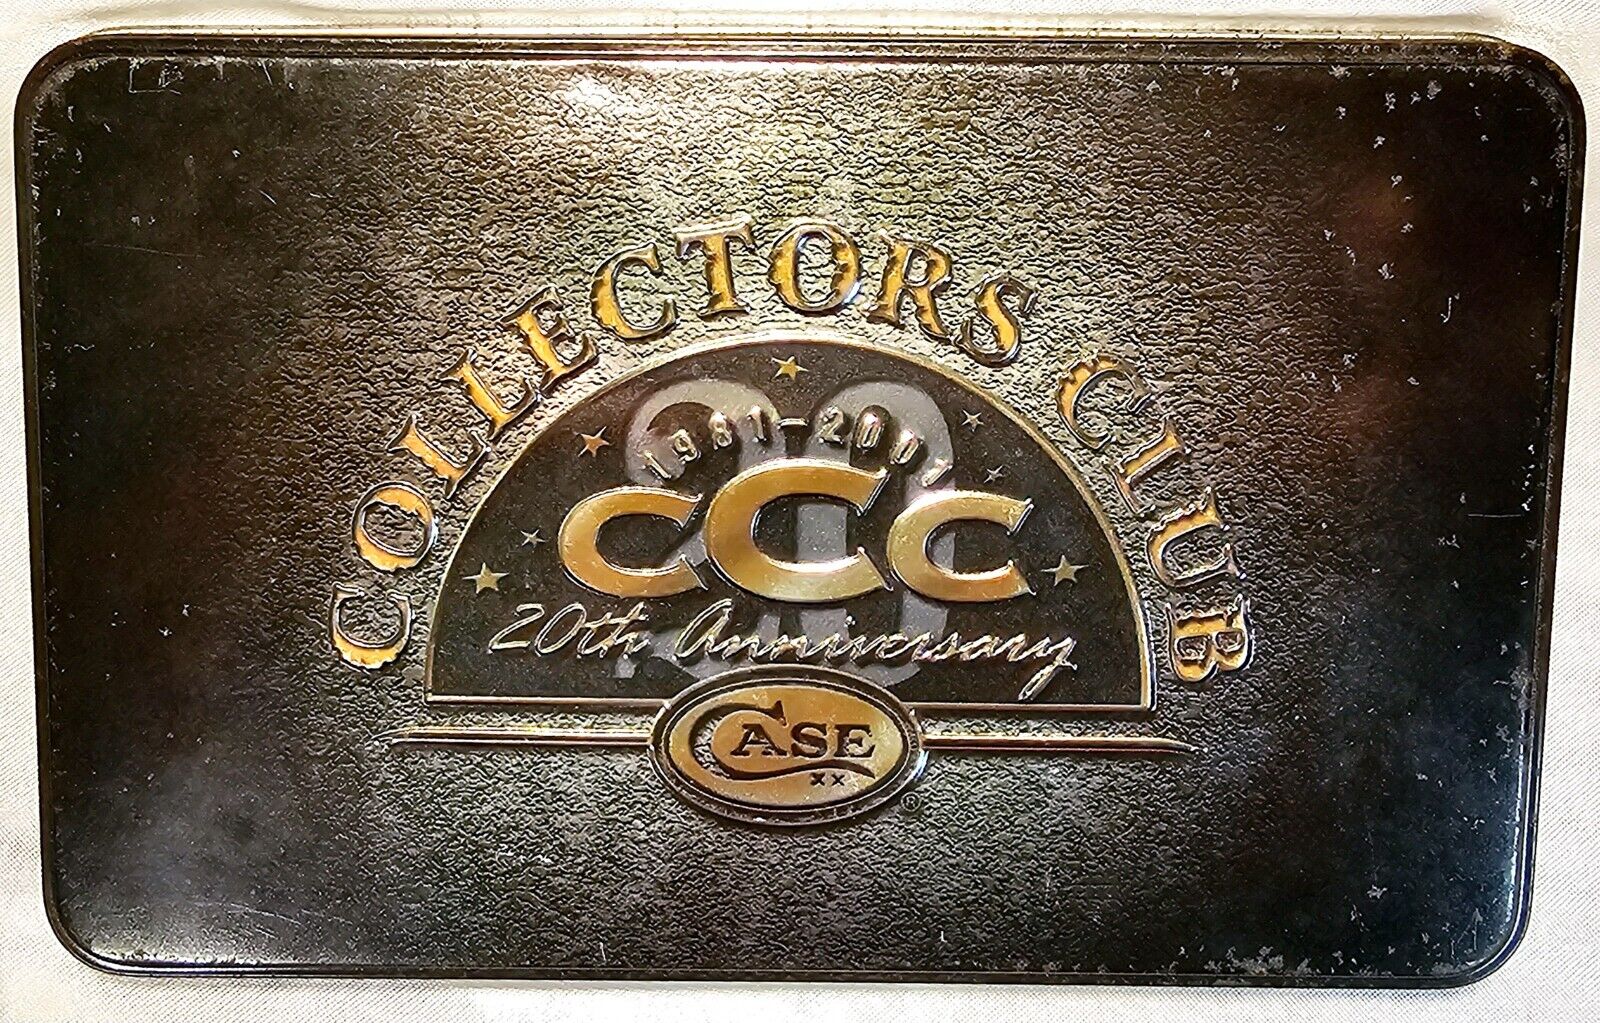 CASE Collectors Club 20th Anniversary 1981 - 2001, CCC SS Medium Toothpick Knife